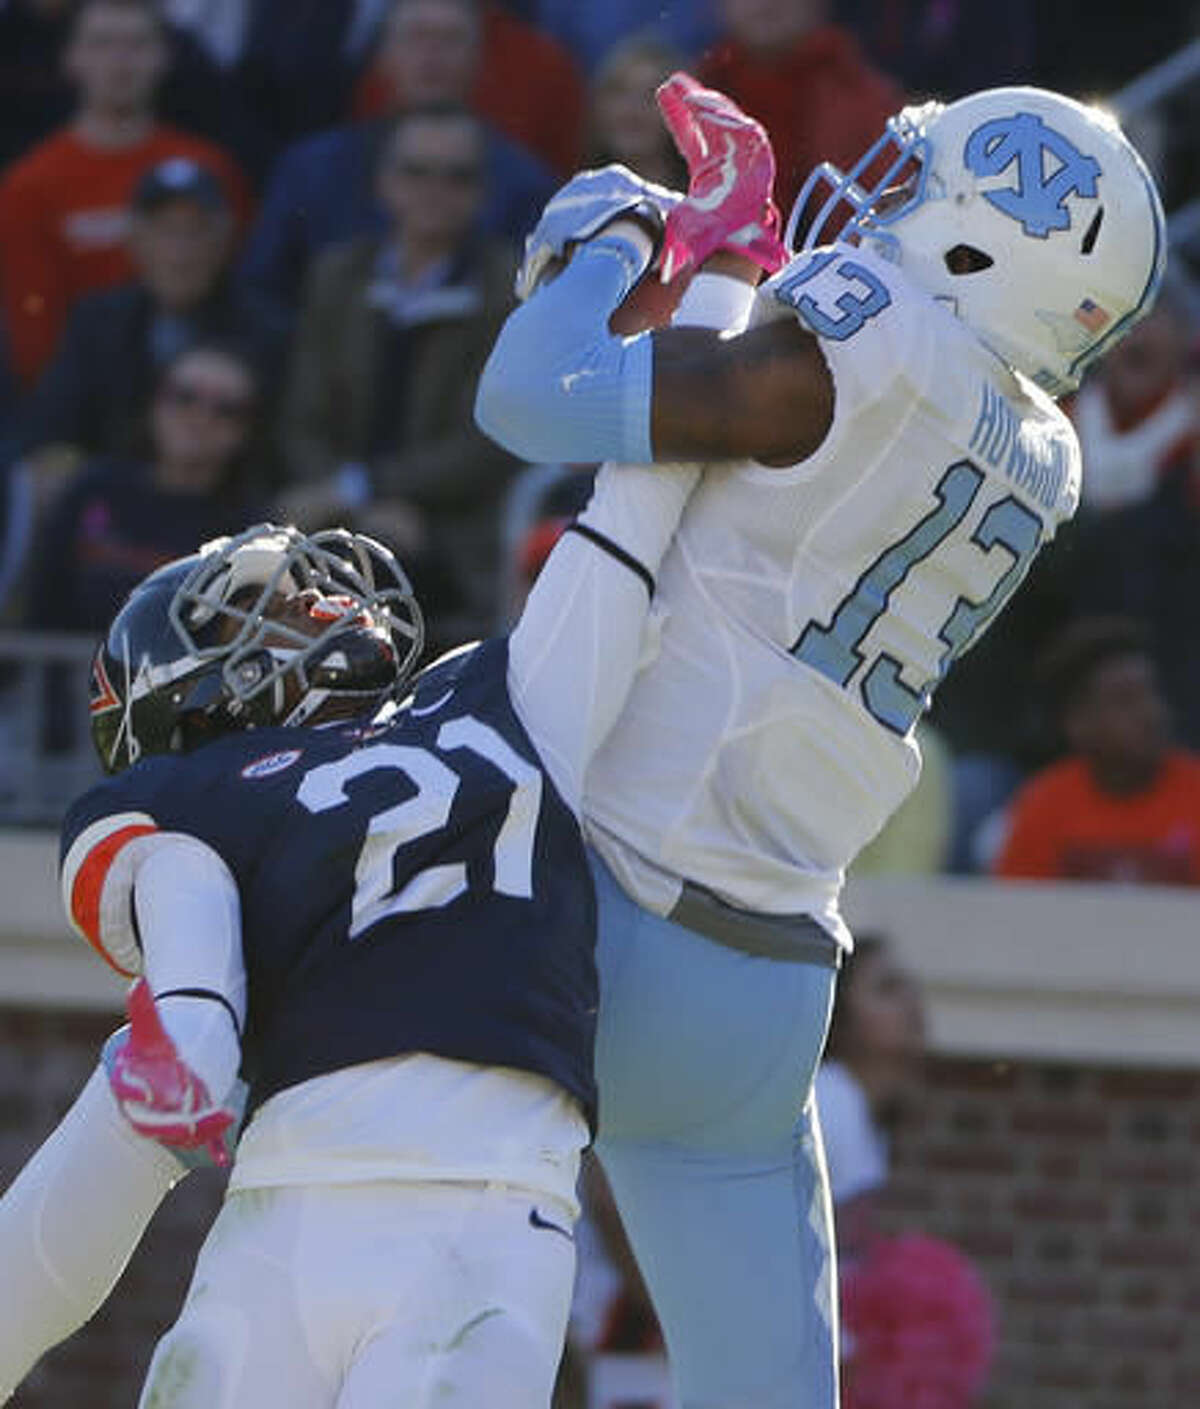 North Carolina wide receiver Bug Howard (84) hauls in a touchdown pass in front of Virginia safety Juan Thornhill (21) during the first half of an NCAA college football game between North Carolina and Virginia at Scott stadium in Charlottesville, Va., Saturday, Oct. 22, 2016. (AP Photo/Steve Helber)